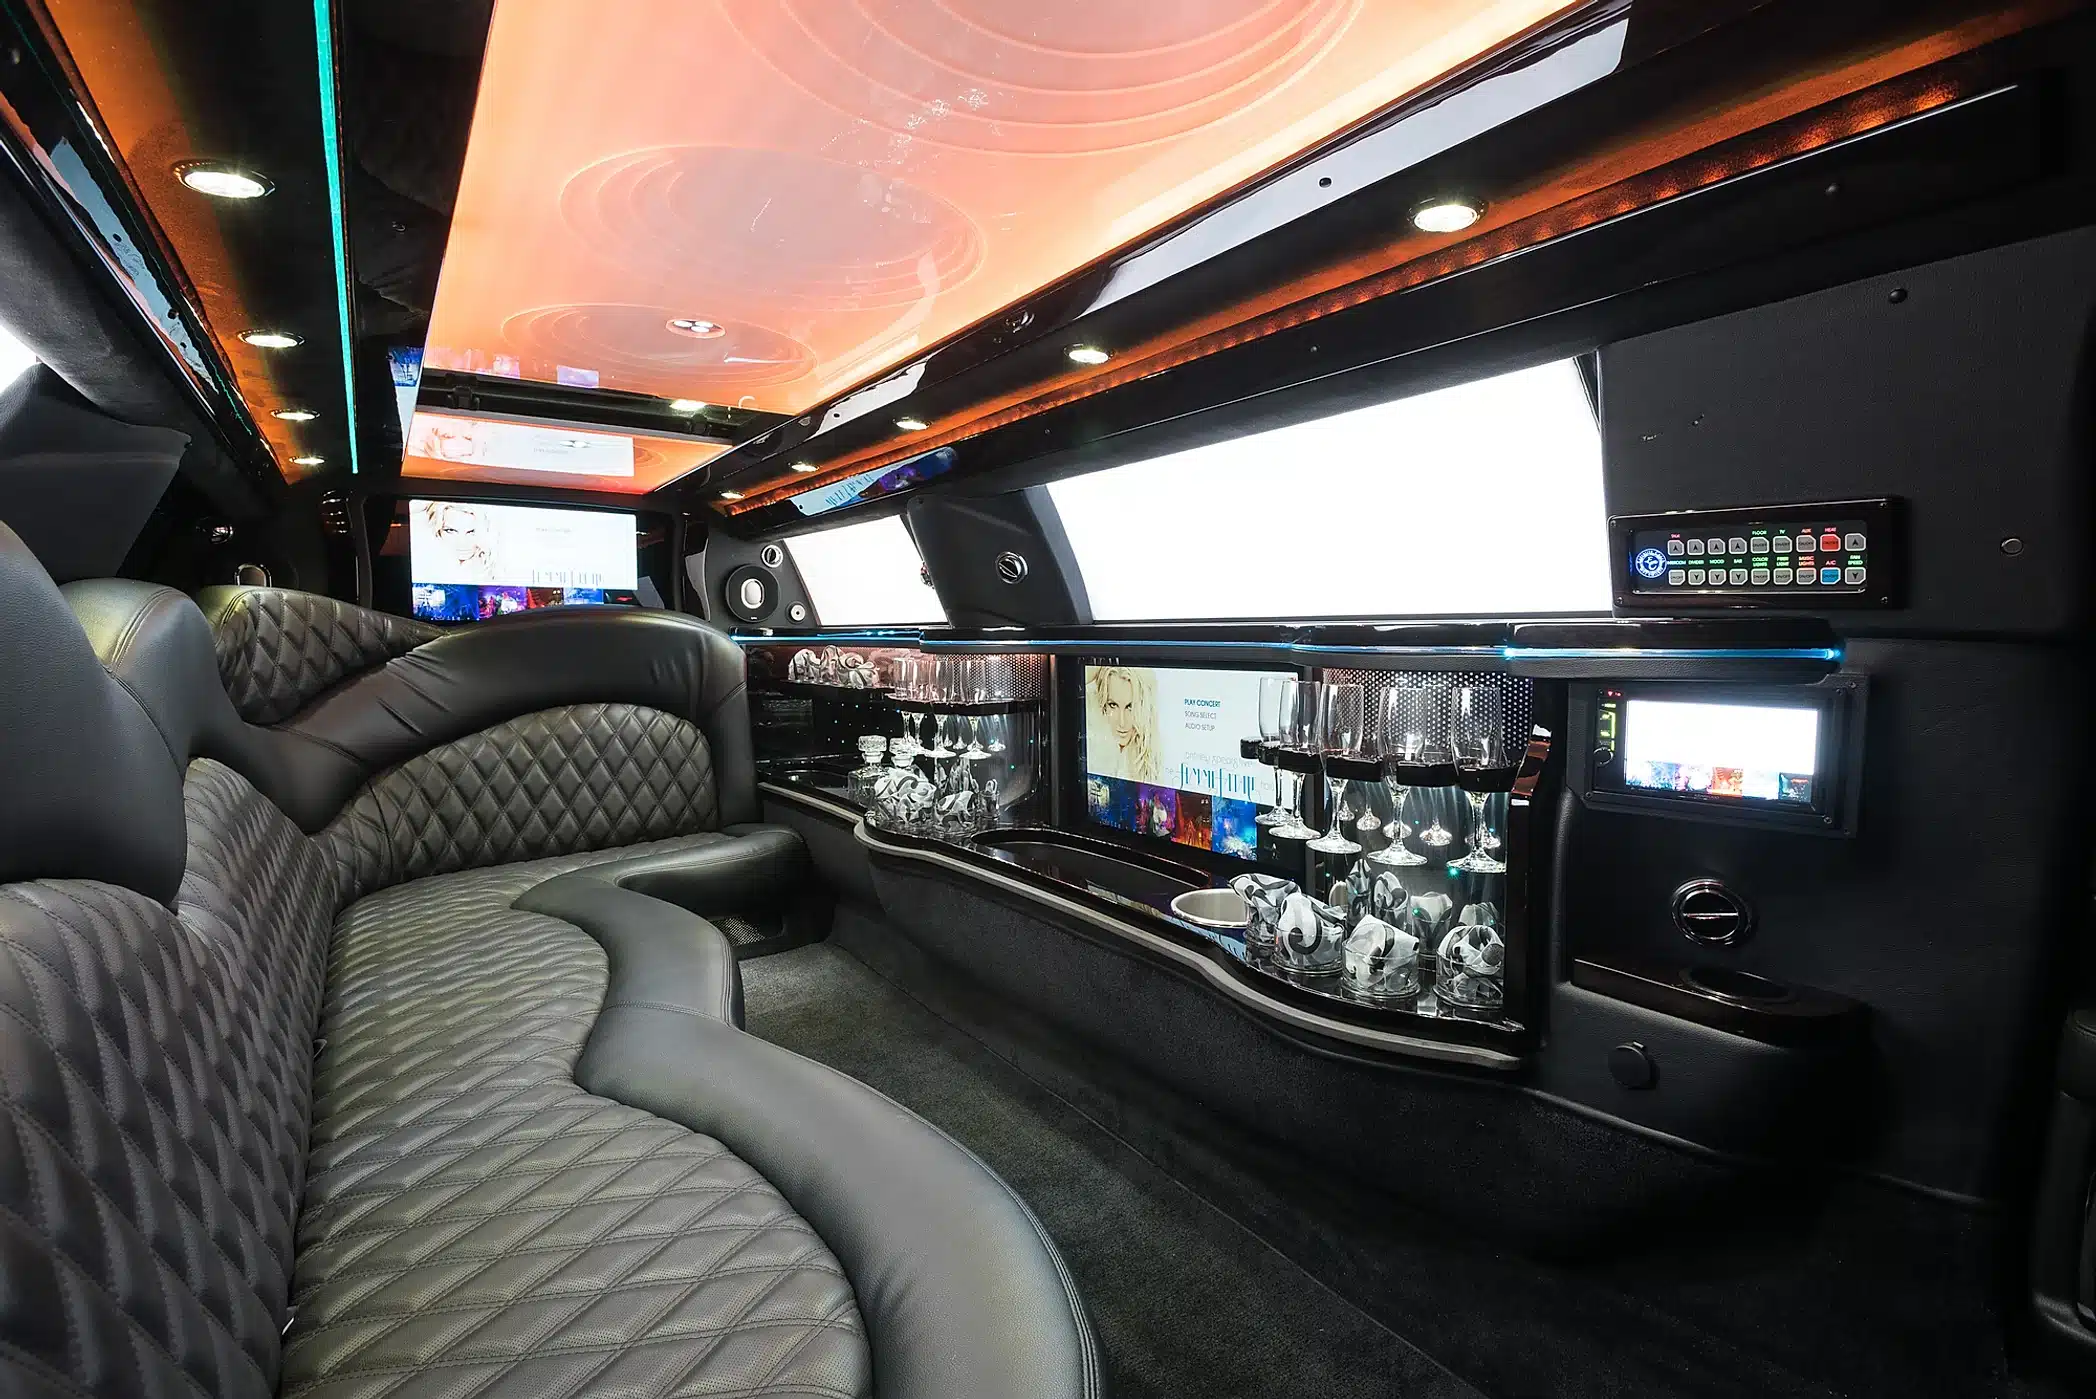 Why Choose Our Los Angeles Limo Service